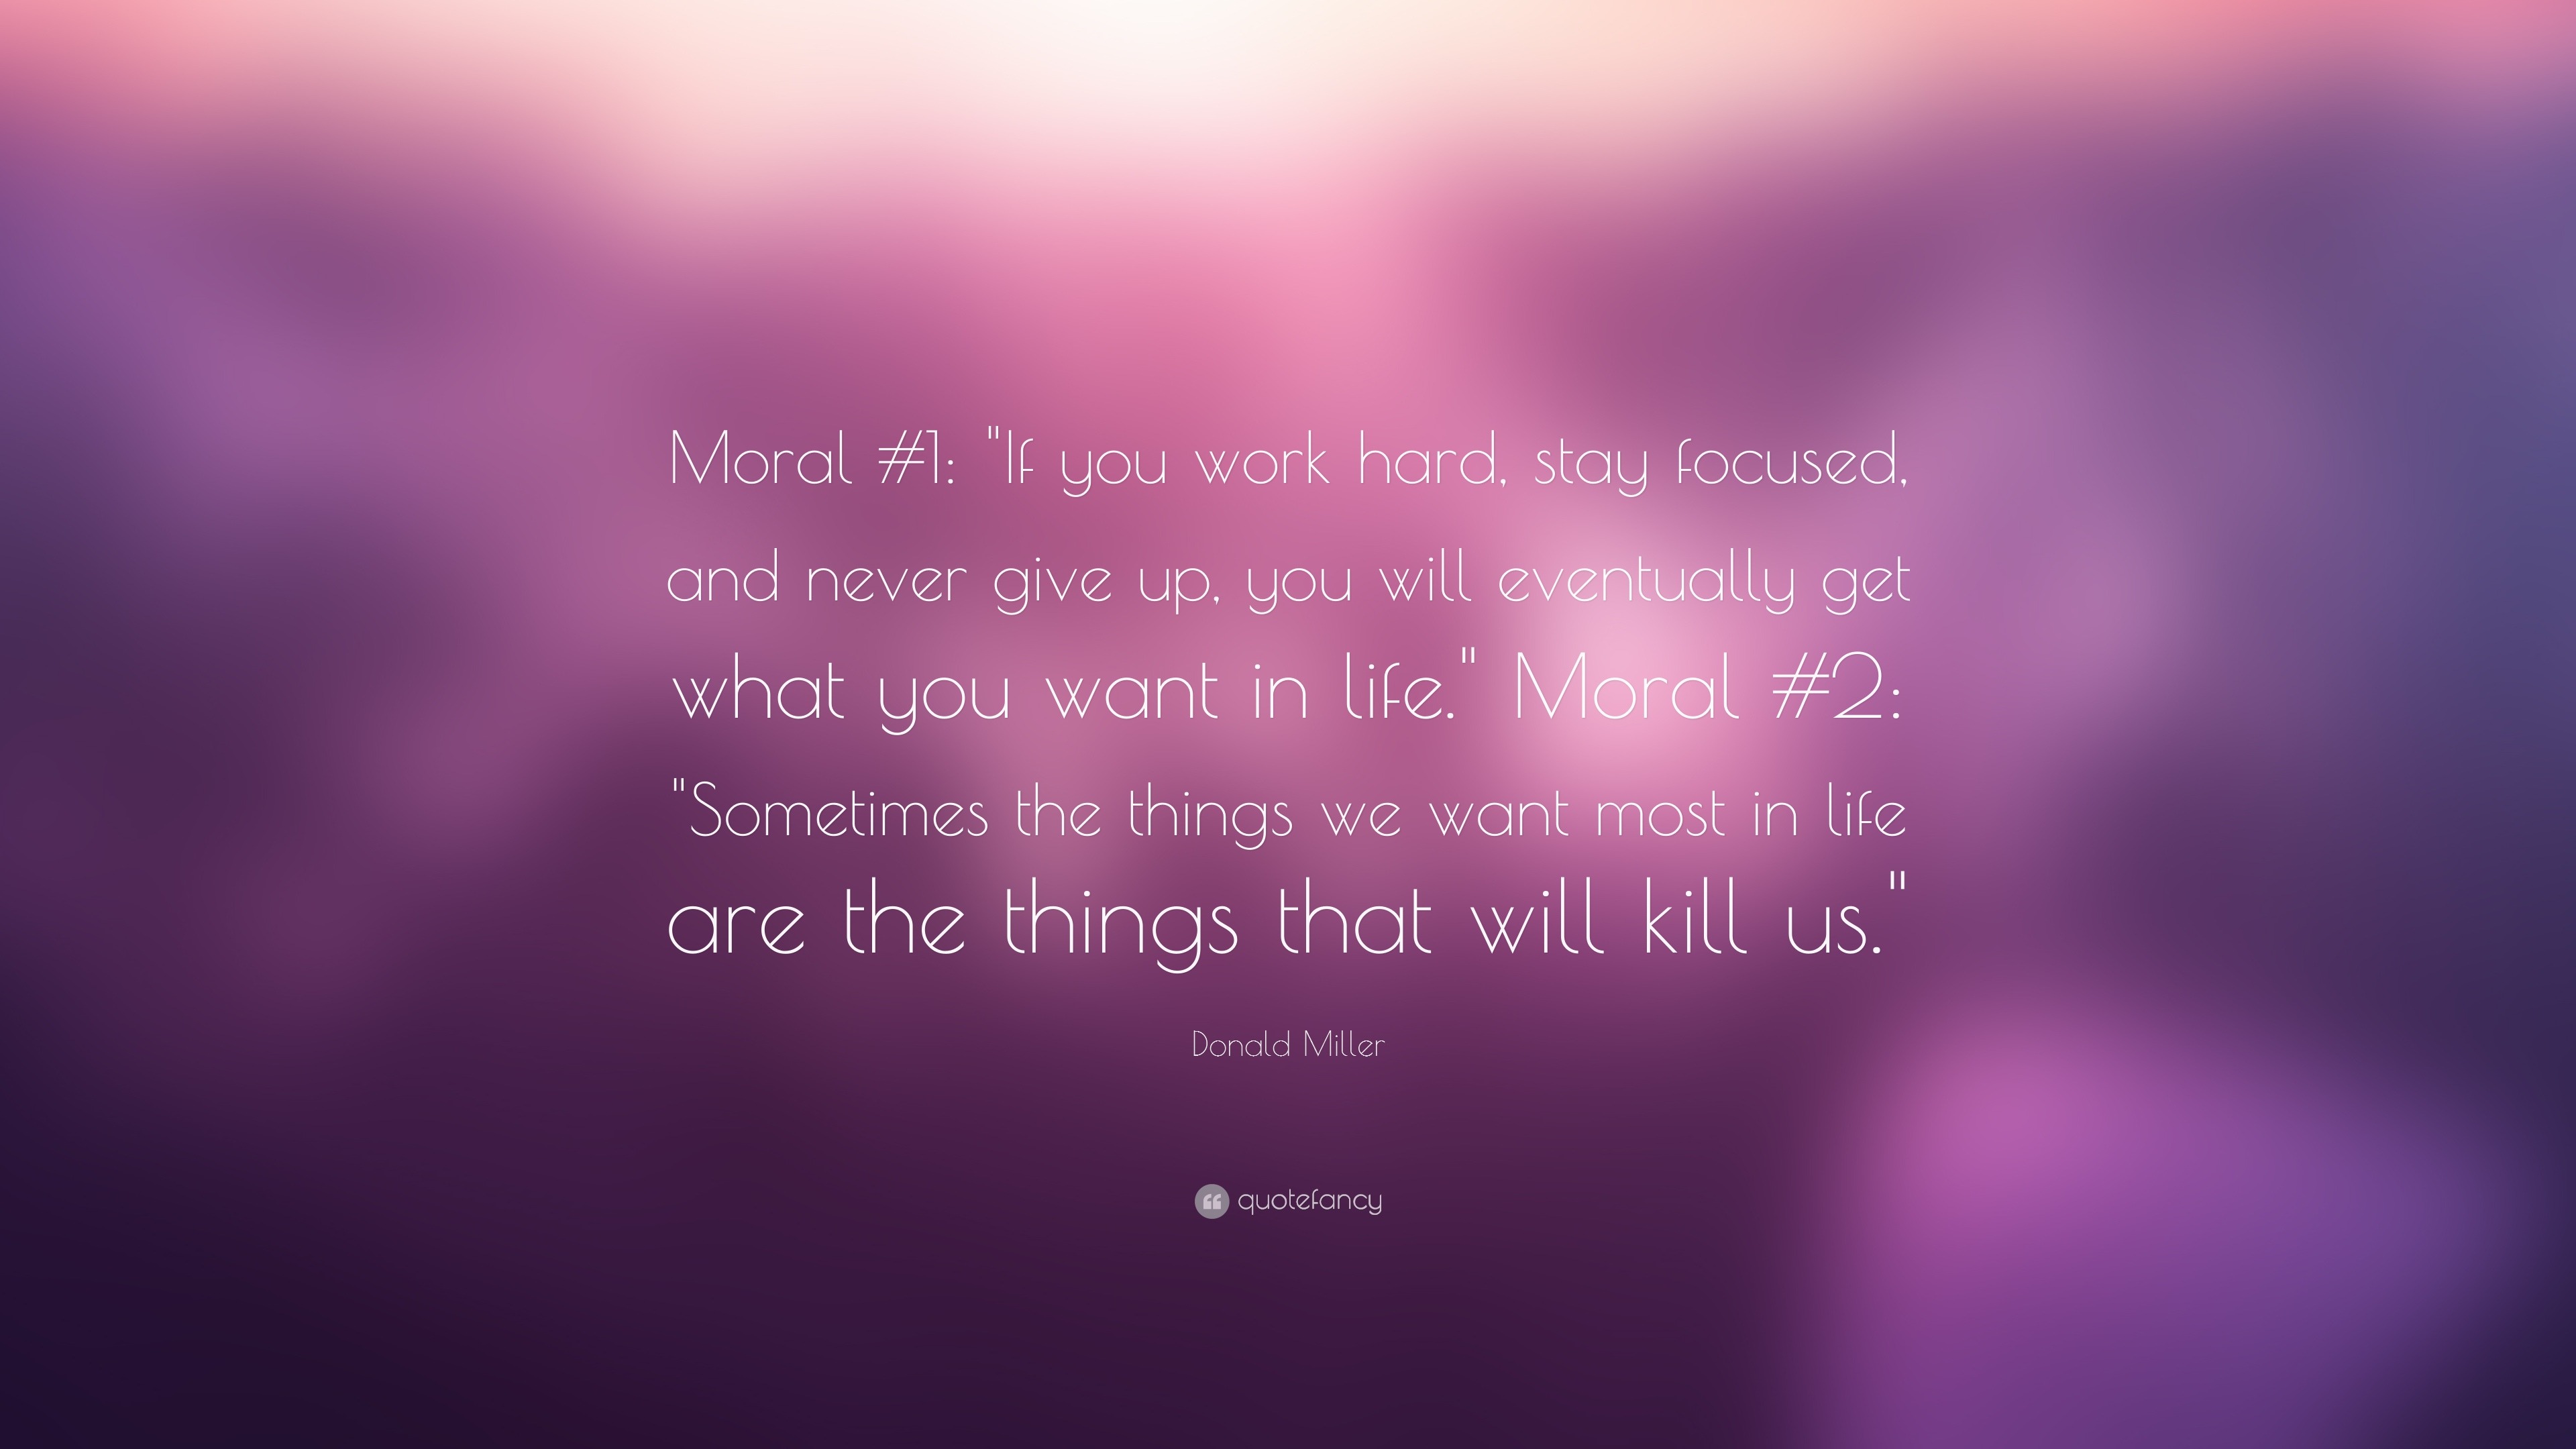 Donald Miller Quote: “Moral #1: "If you work hard, stay focused, and